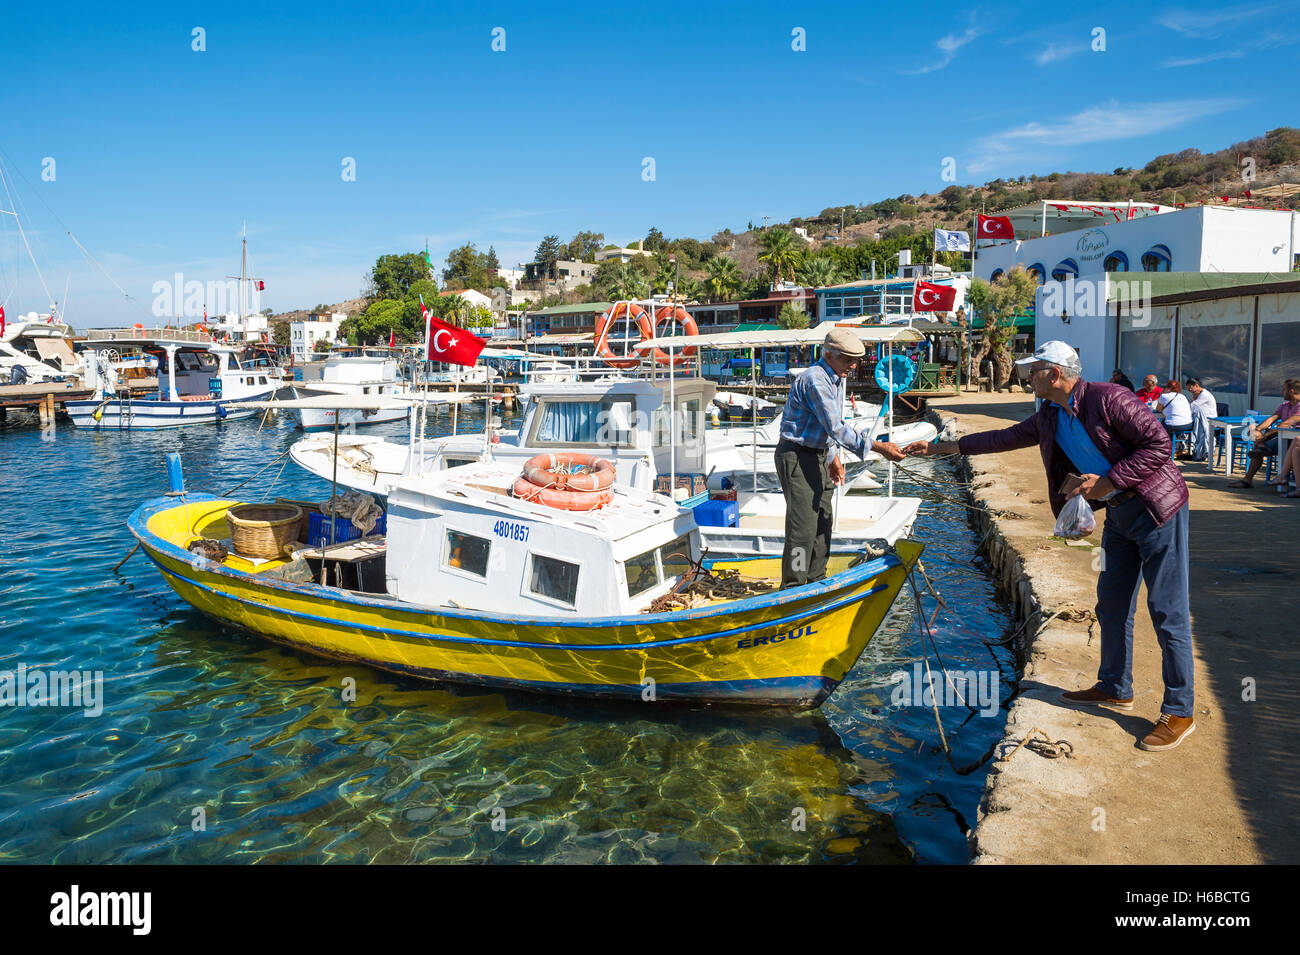 BODRUM, TURKEY - OCTOBER 10, 2016: Fisherman in traditional fishing boat takes payment from a customer in a fishing village. Stock Photo